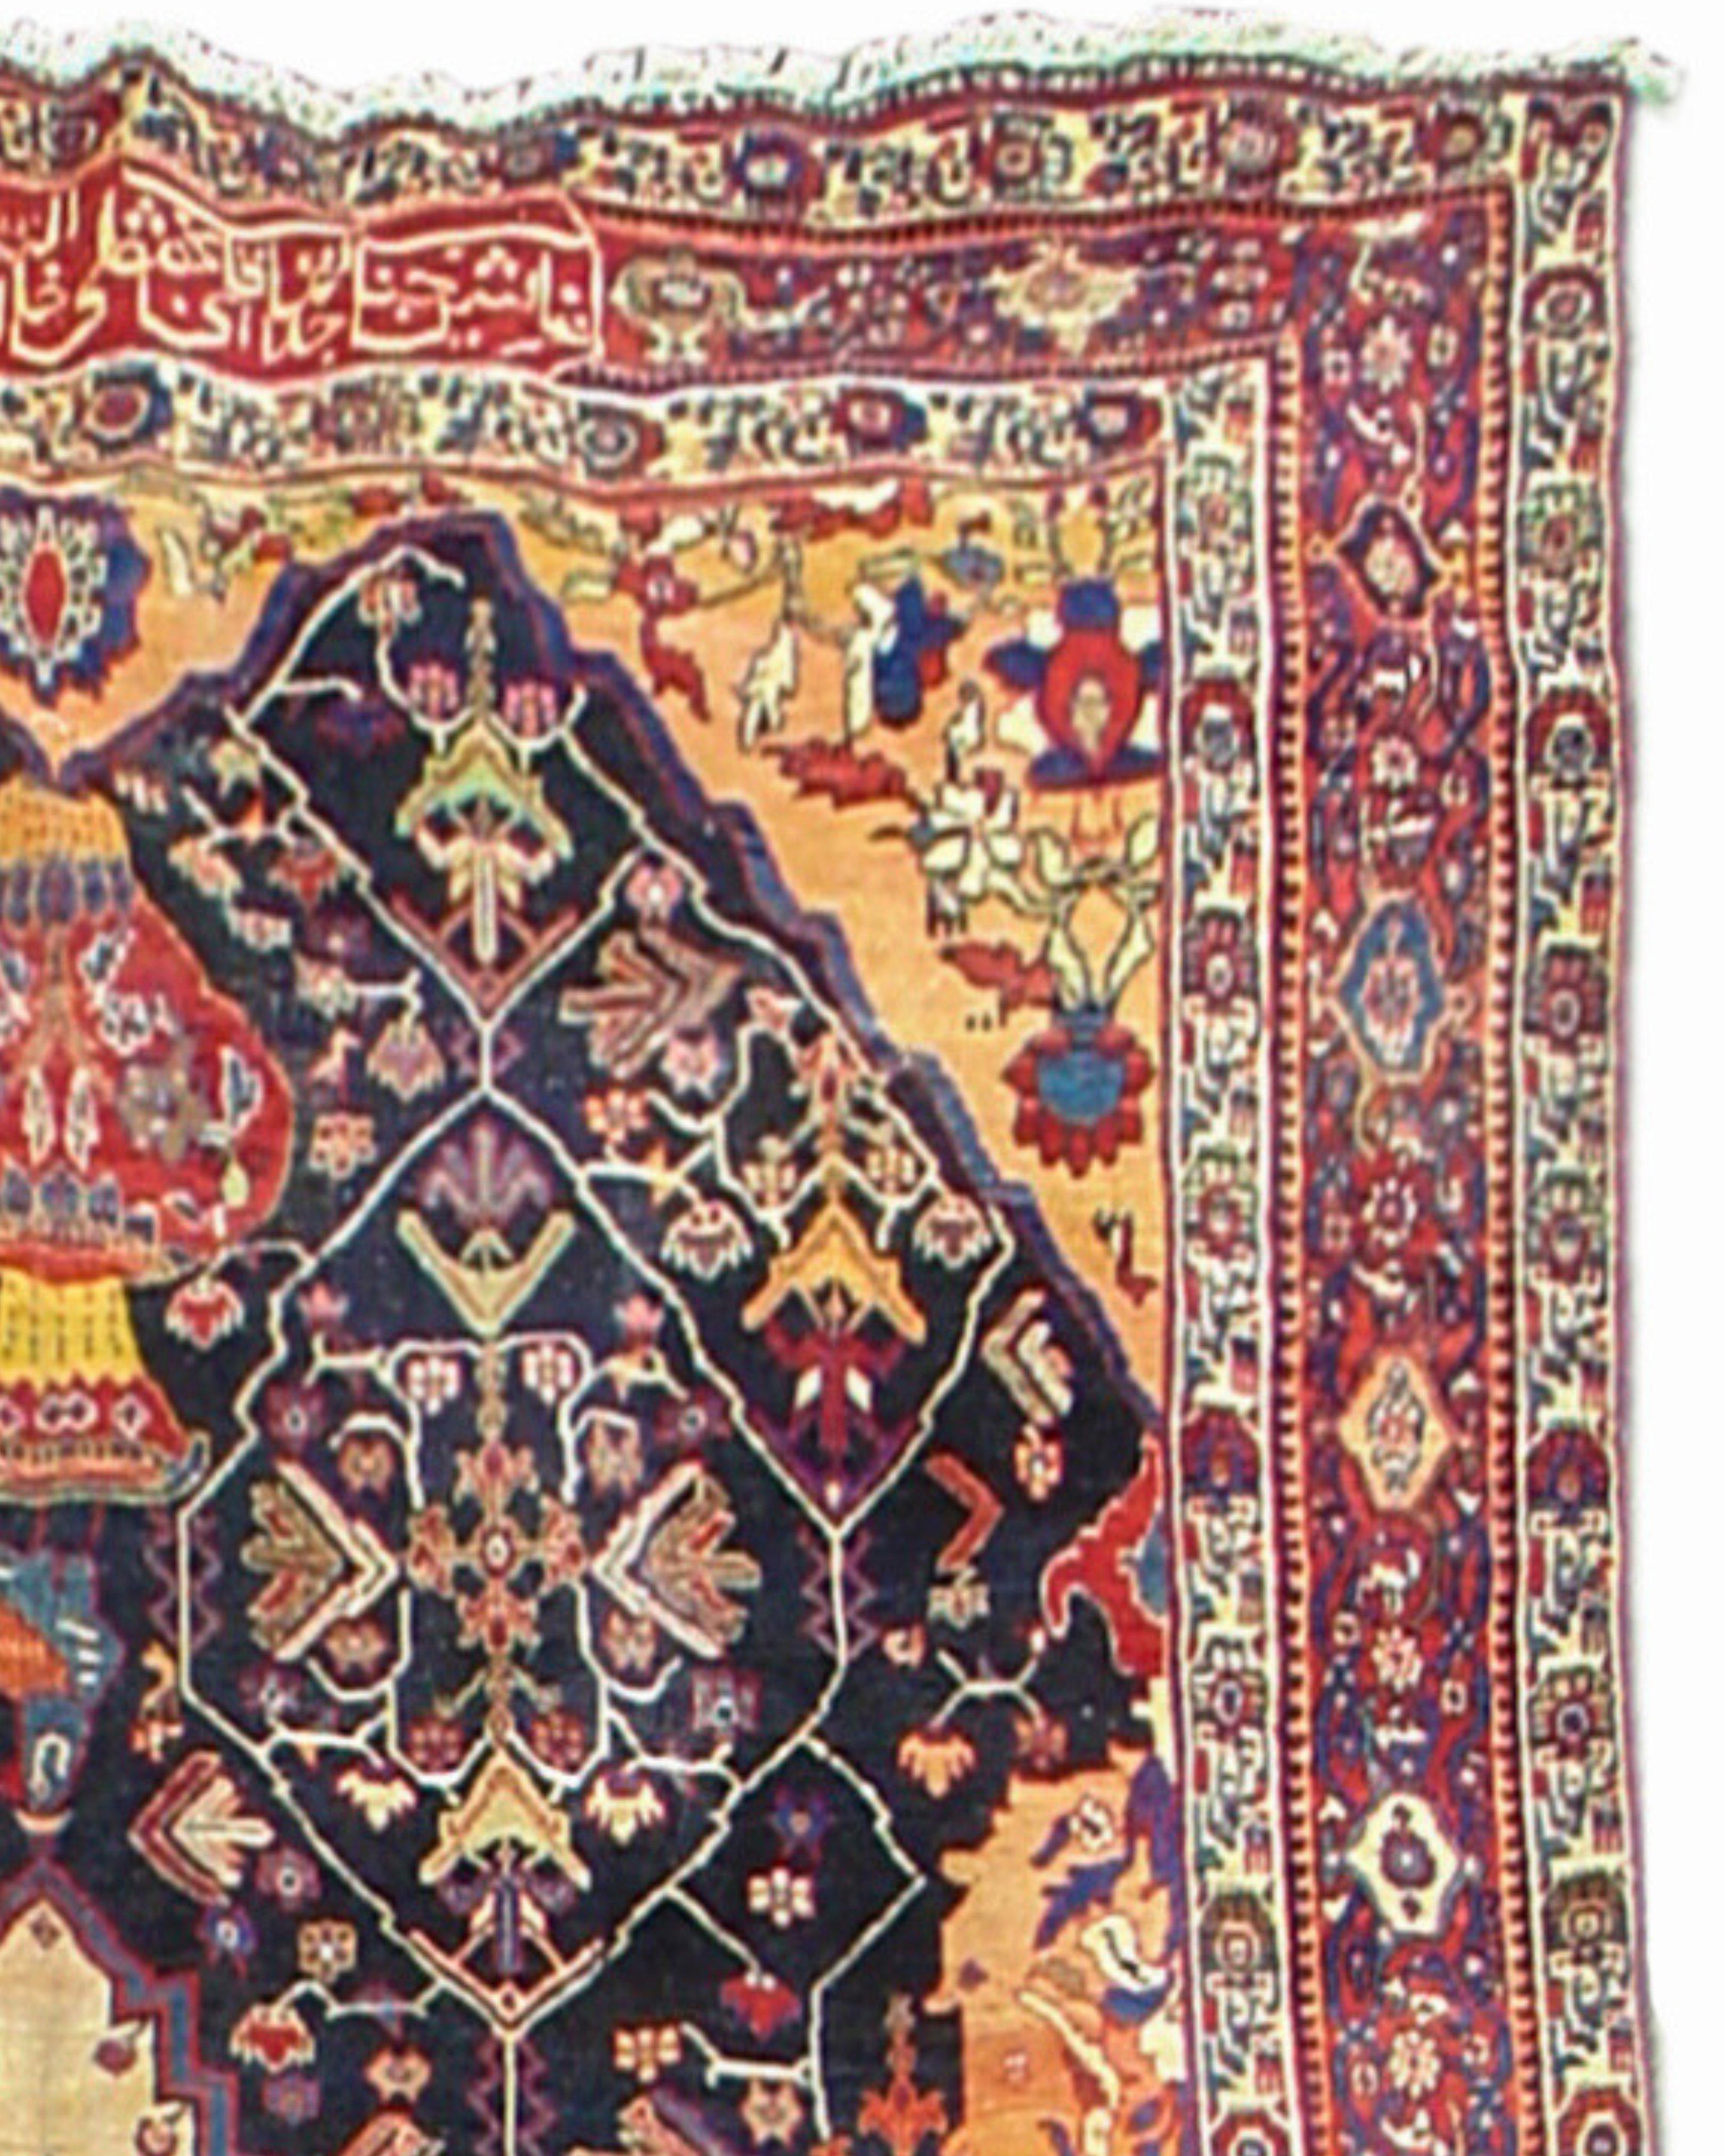 Antique Persian Bakhtiari Carpet Rug, Early 20th Century

The Persian script on the top middle of this Bakhtiari rug indicates that the rug is made as a special order for a government official. The word farmayesh means “in the order of”, and the